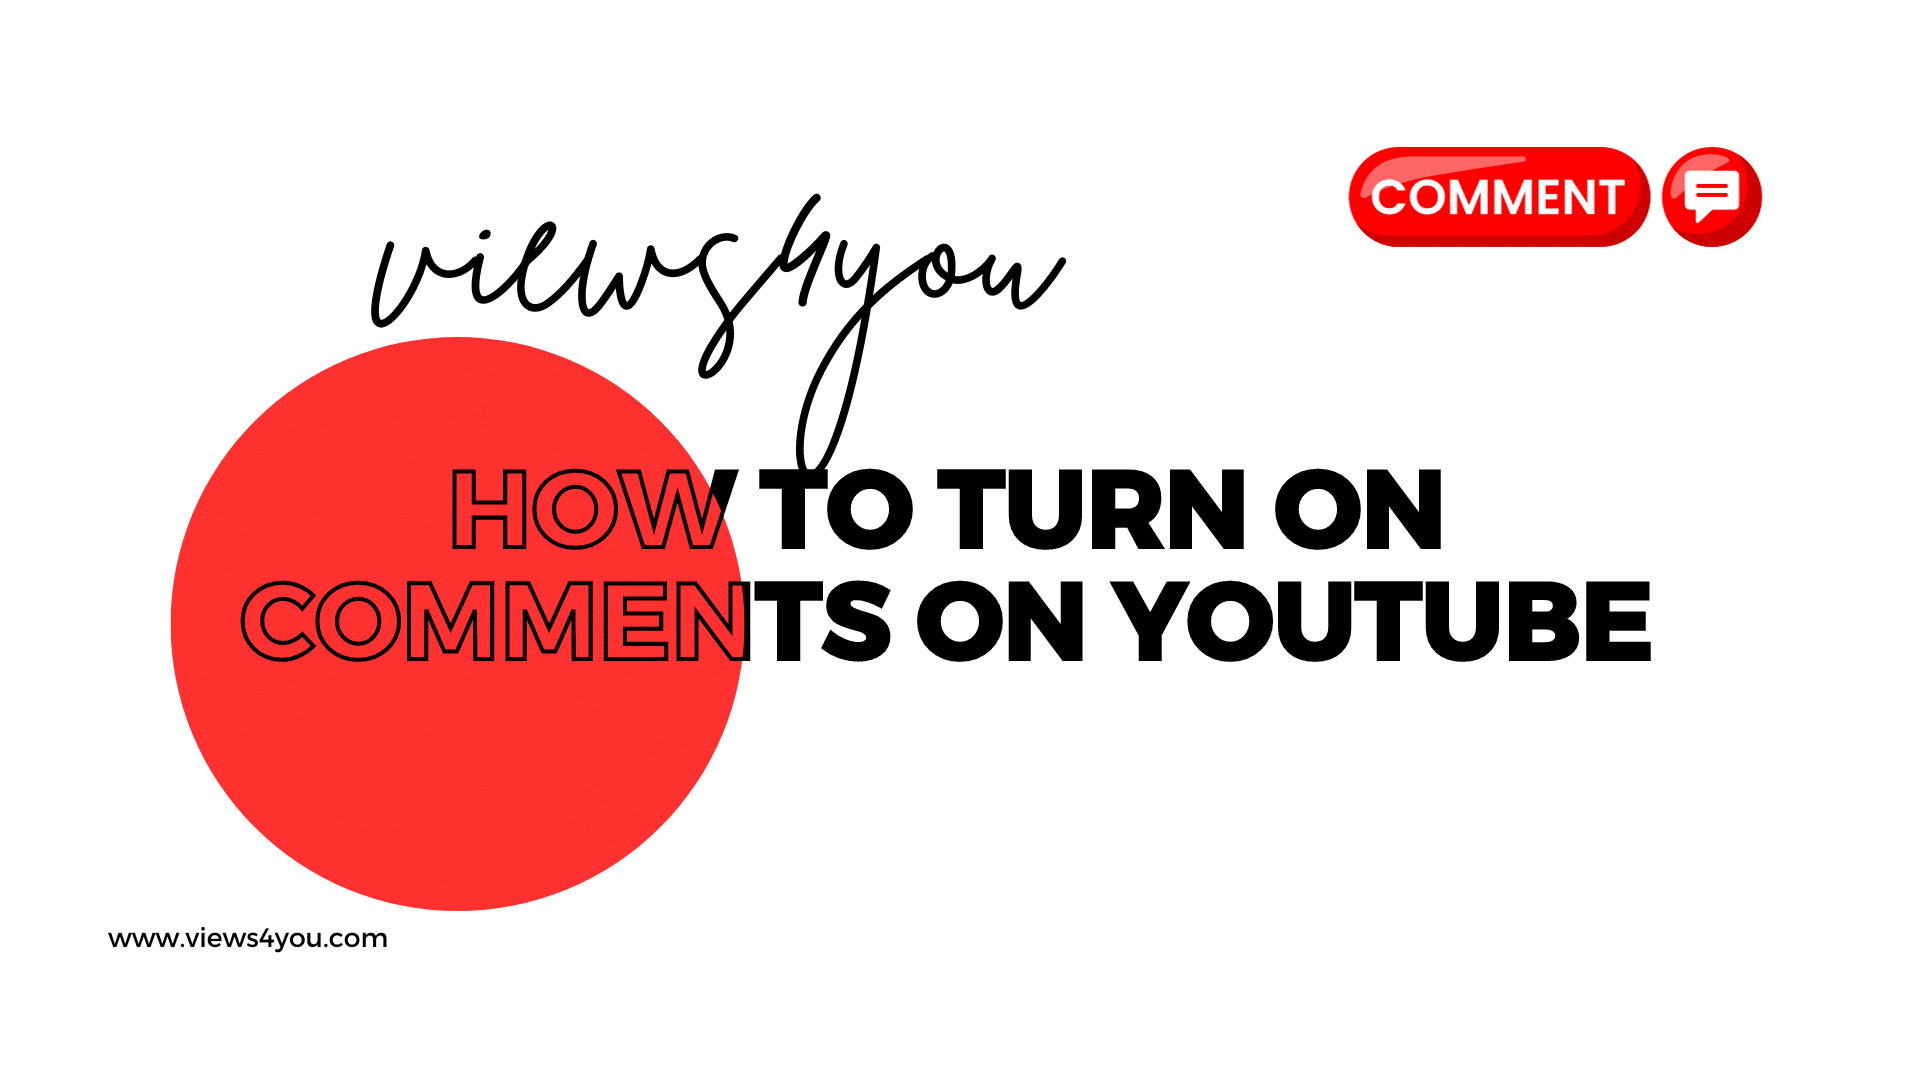 Guide on how to turn on comments on YouTube.